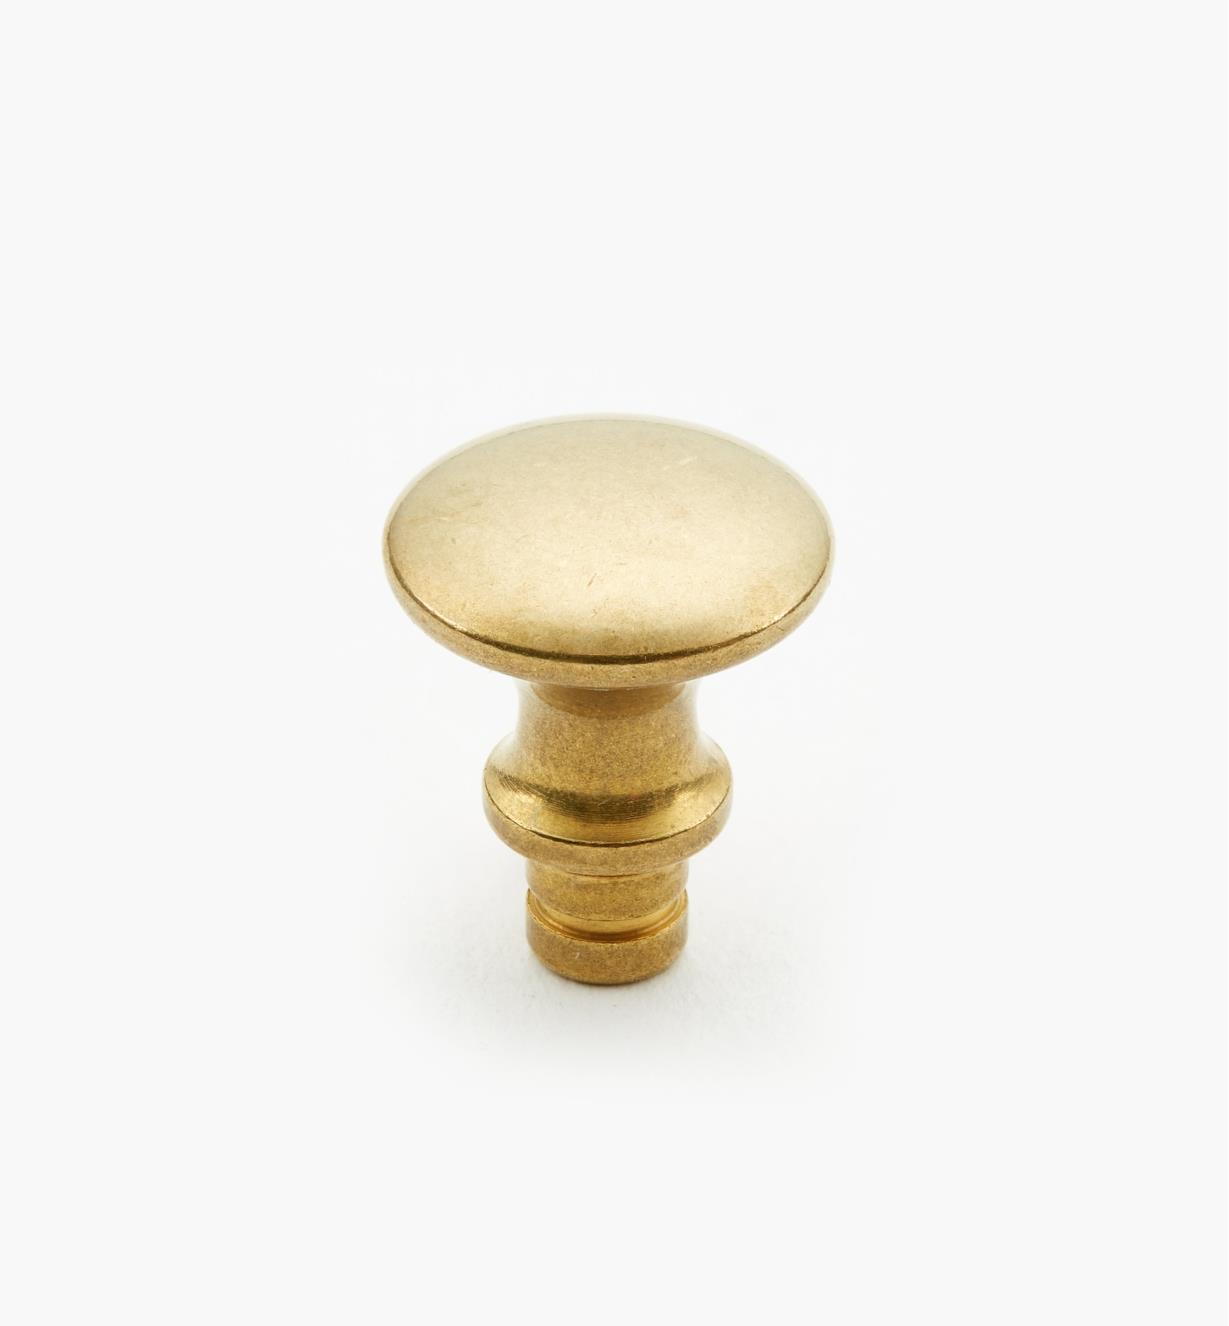 05H2204 - 1/2" x 7/16" Lee Valley Small Turned Brass Knob (5/8")